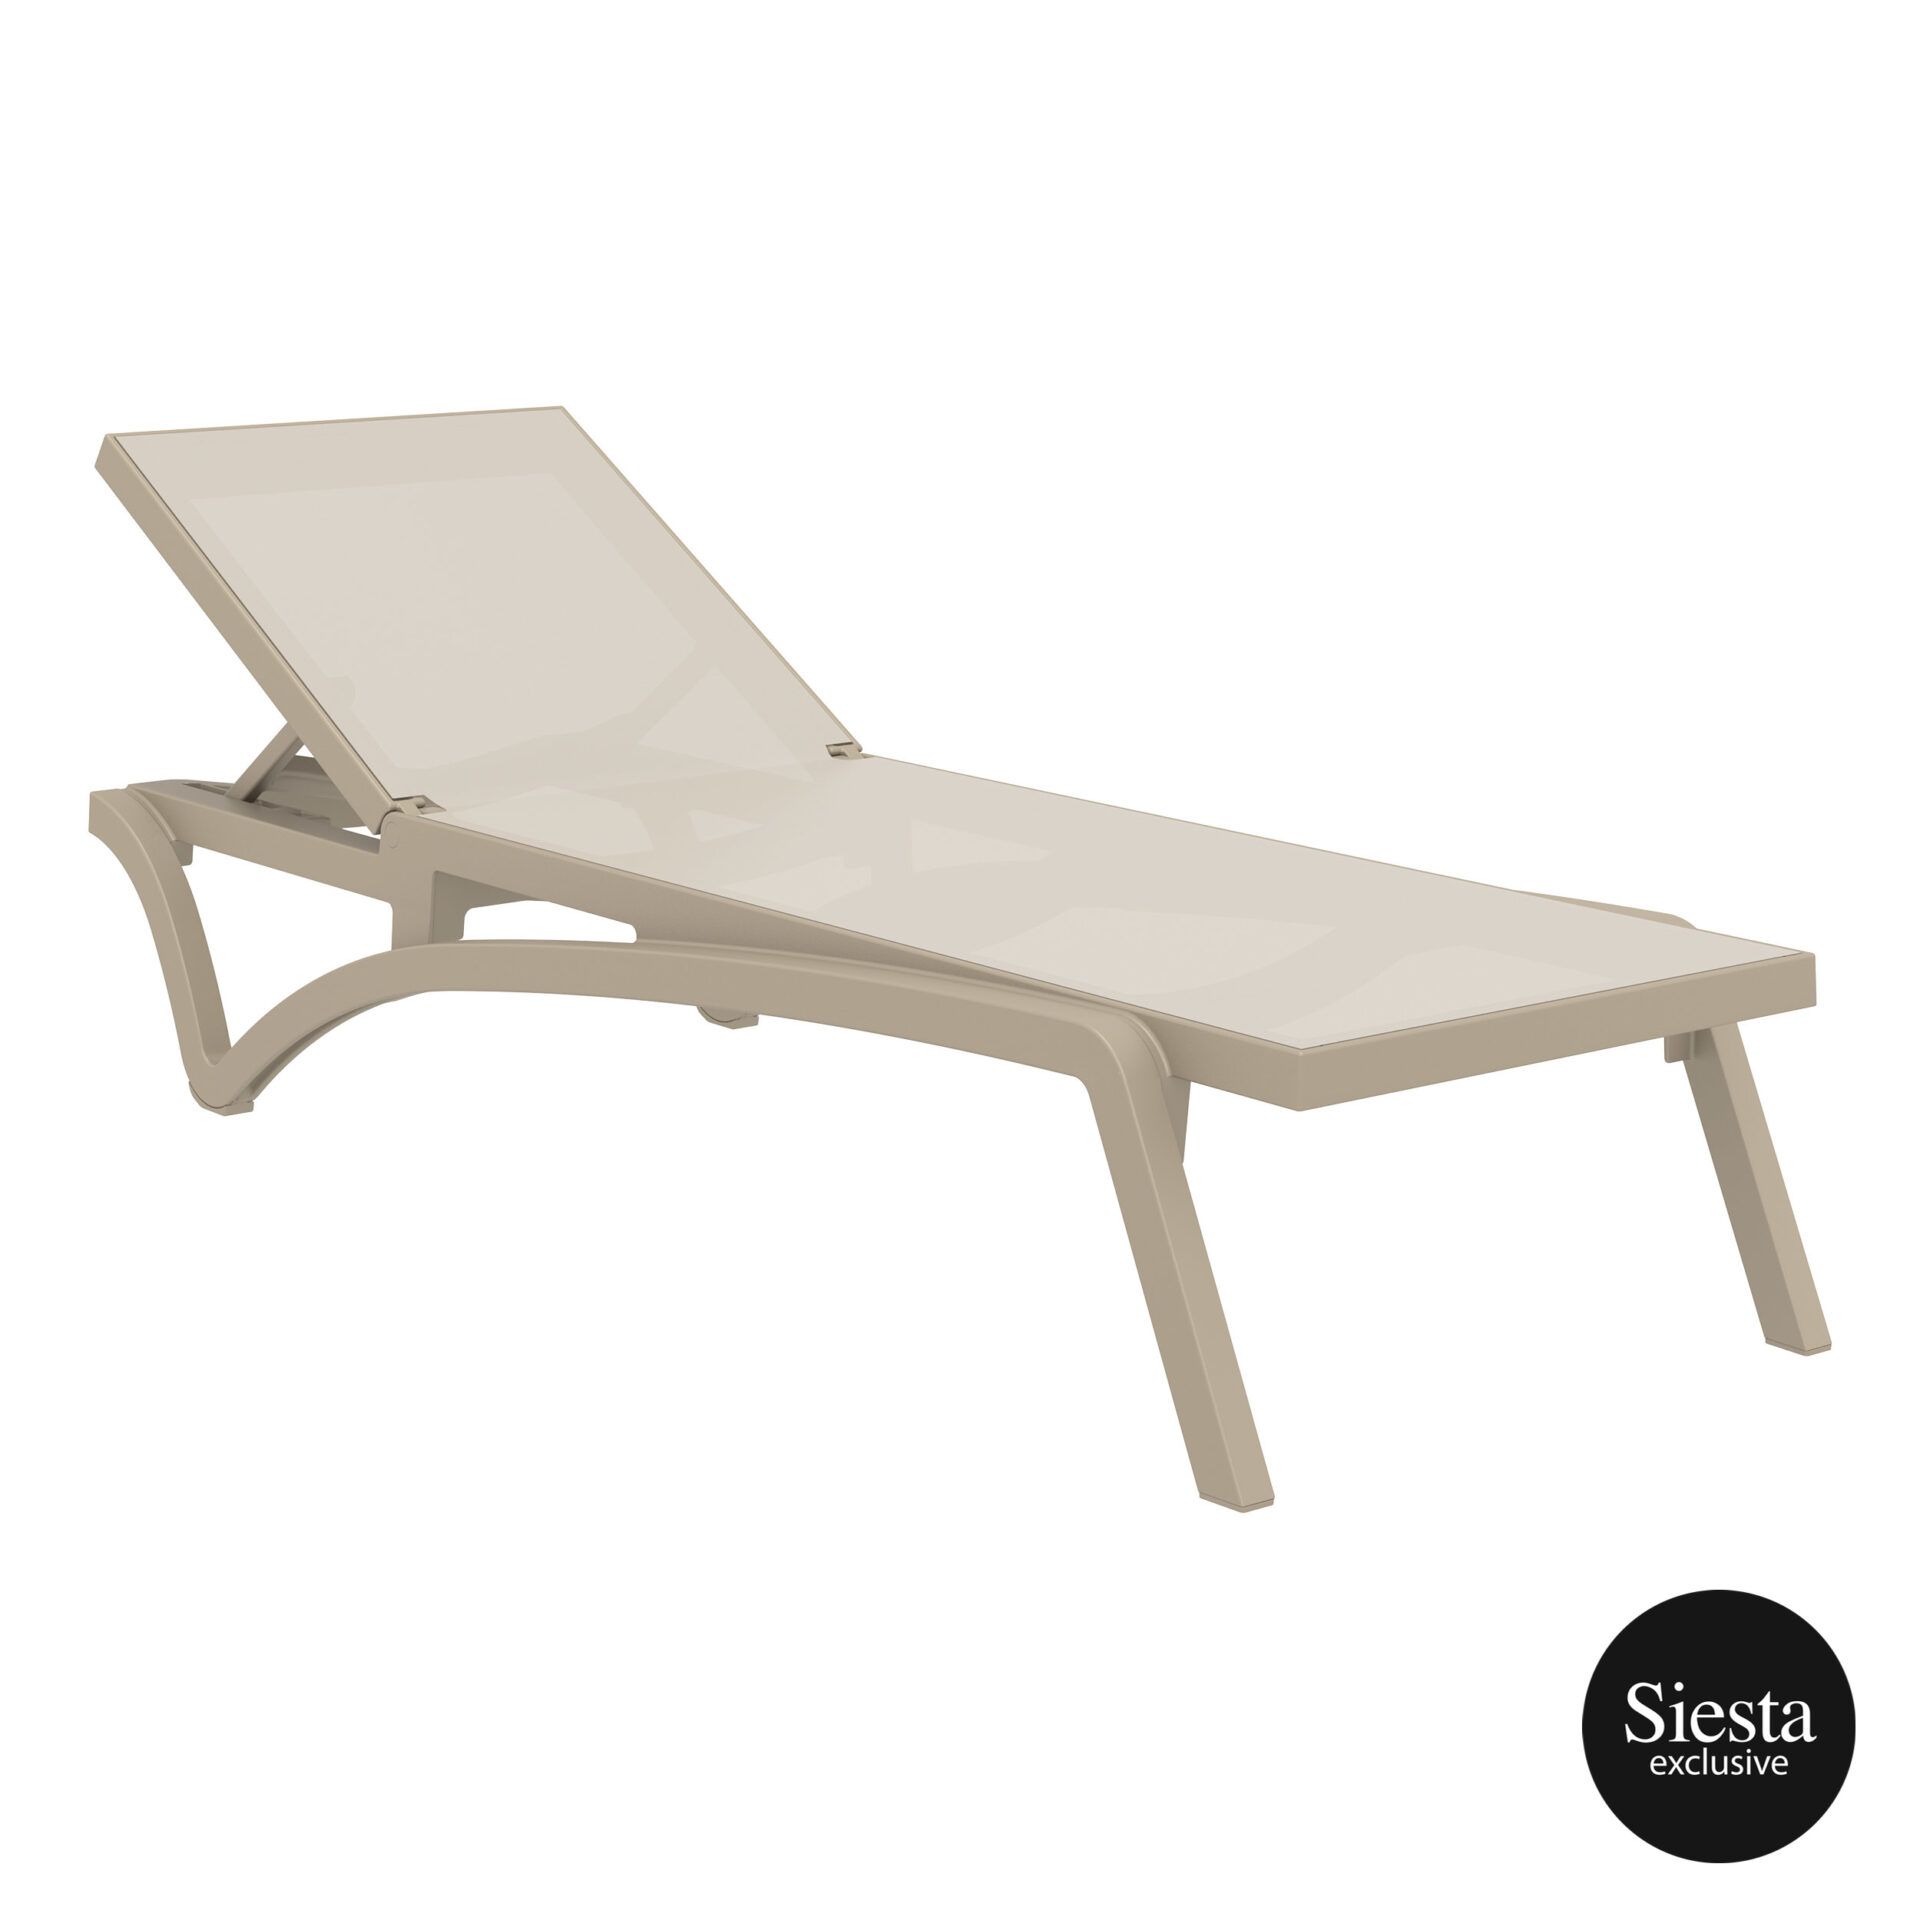 Pacific Sunlounger - Taupe/Taupe